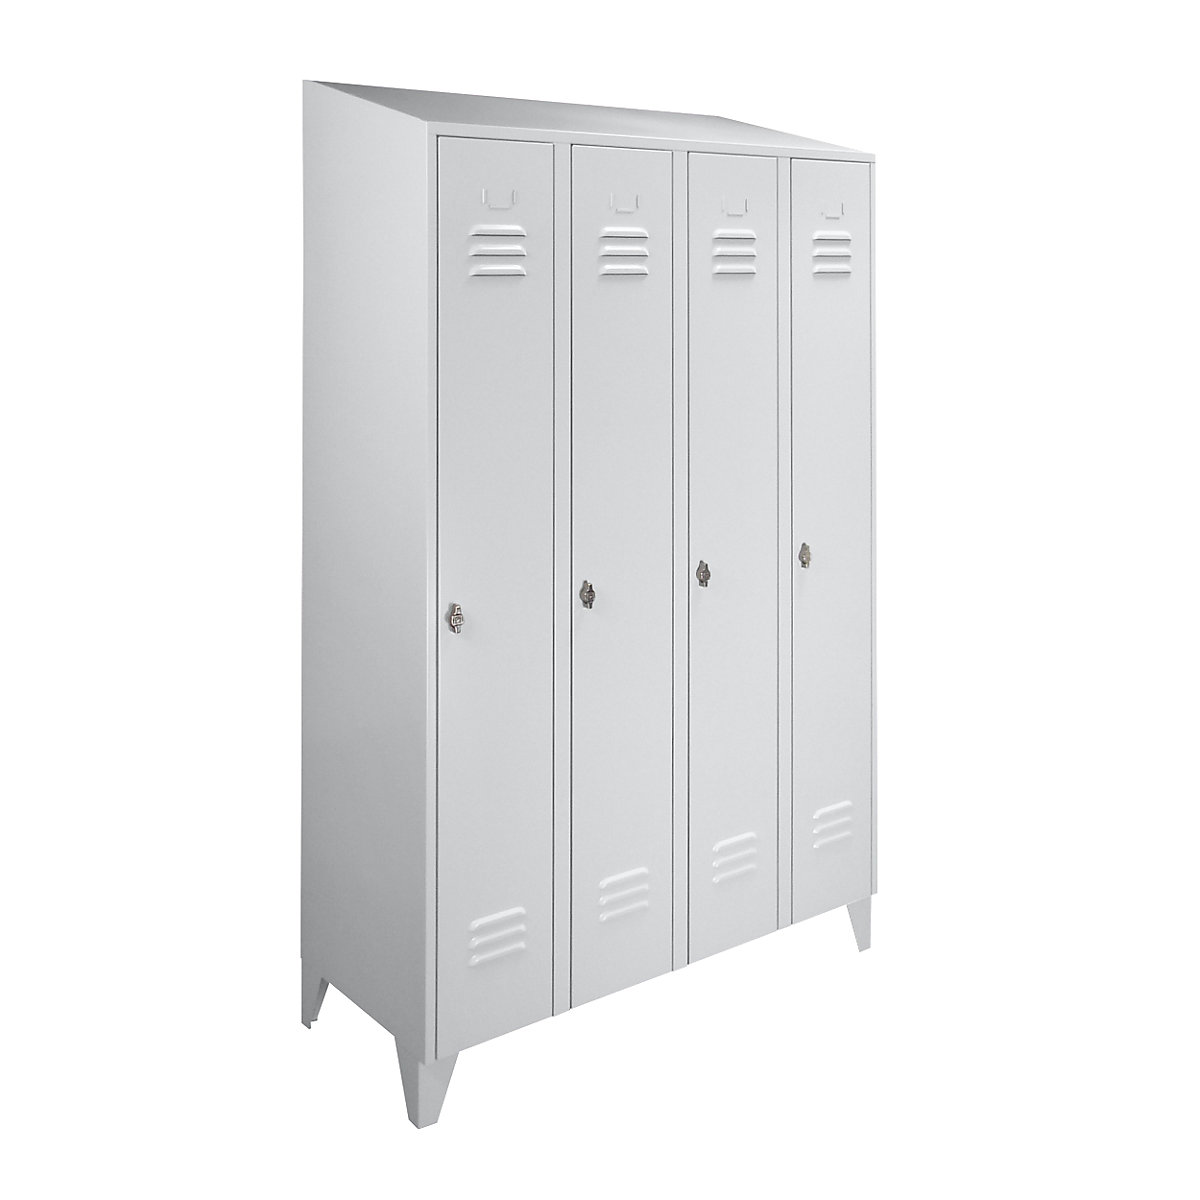 Steel cupboard with sloping top, full height compartments – Wolf, total width 1200 mm, 4 compartments, light grey RAL 7035-4